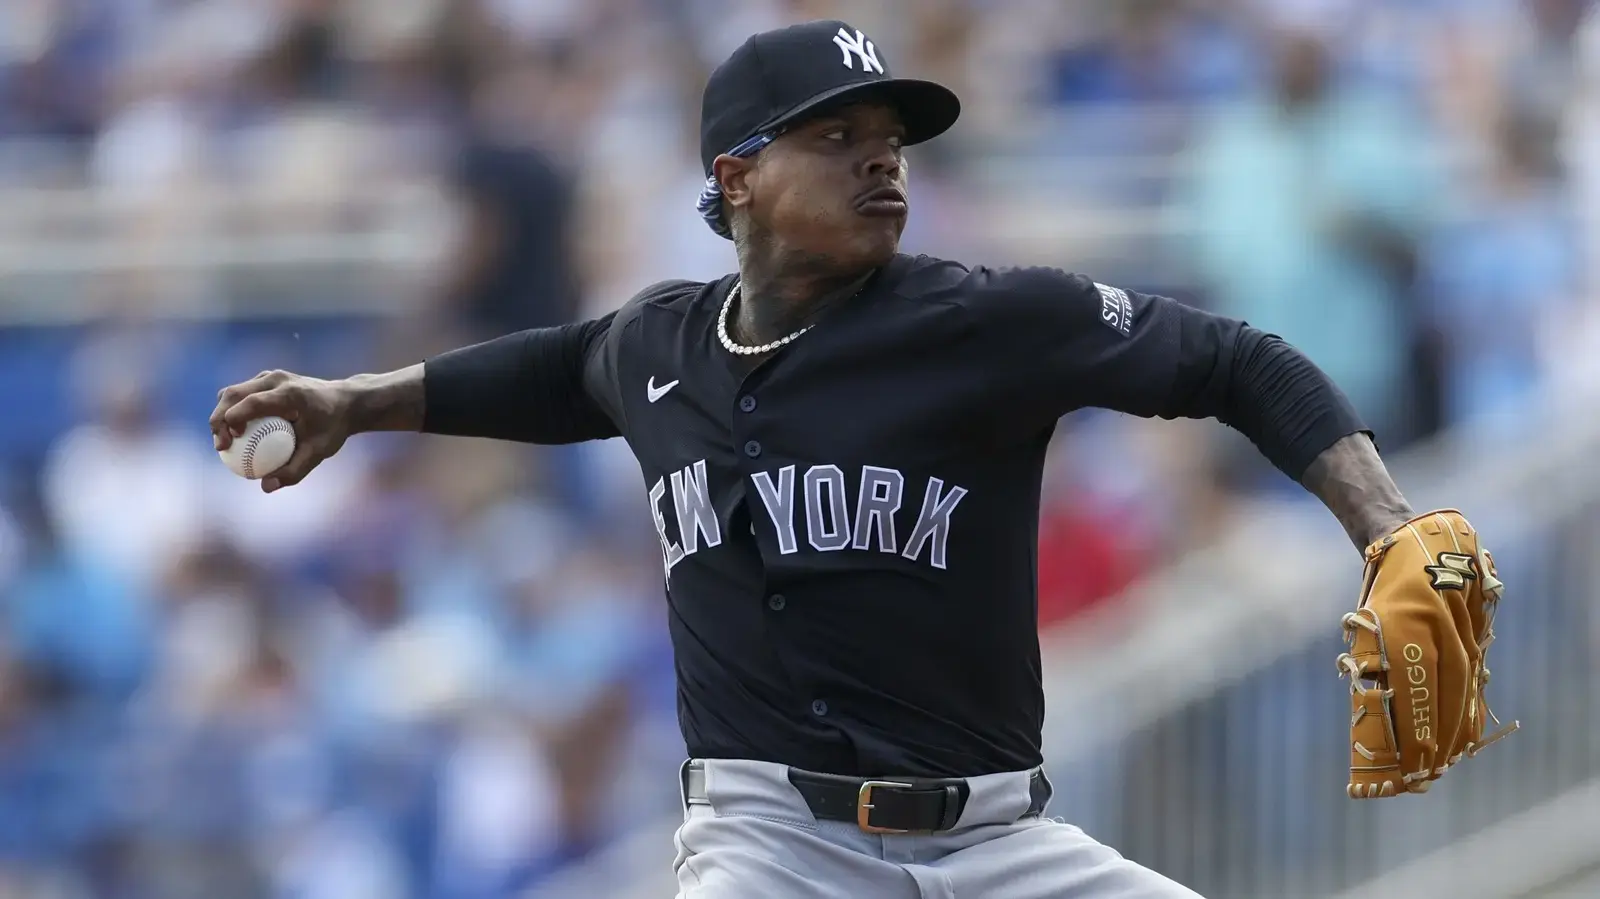 New York Yankees starting pitcher Marcus Stroman (0) throws a pitch against the Toronto Blue Jays in the first inning at TD Ballpark. / Nathan Ray Seebeck-USA TODAY Sports